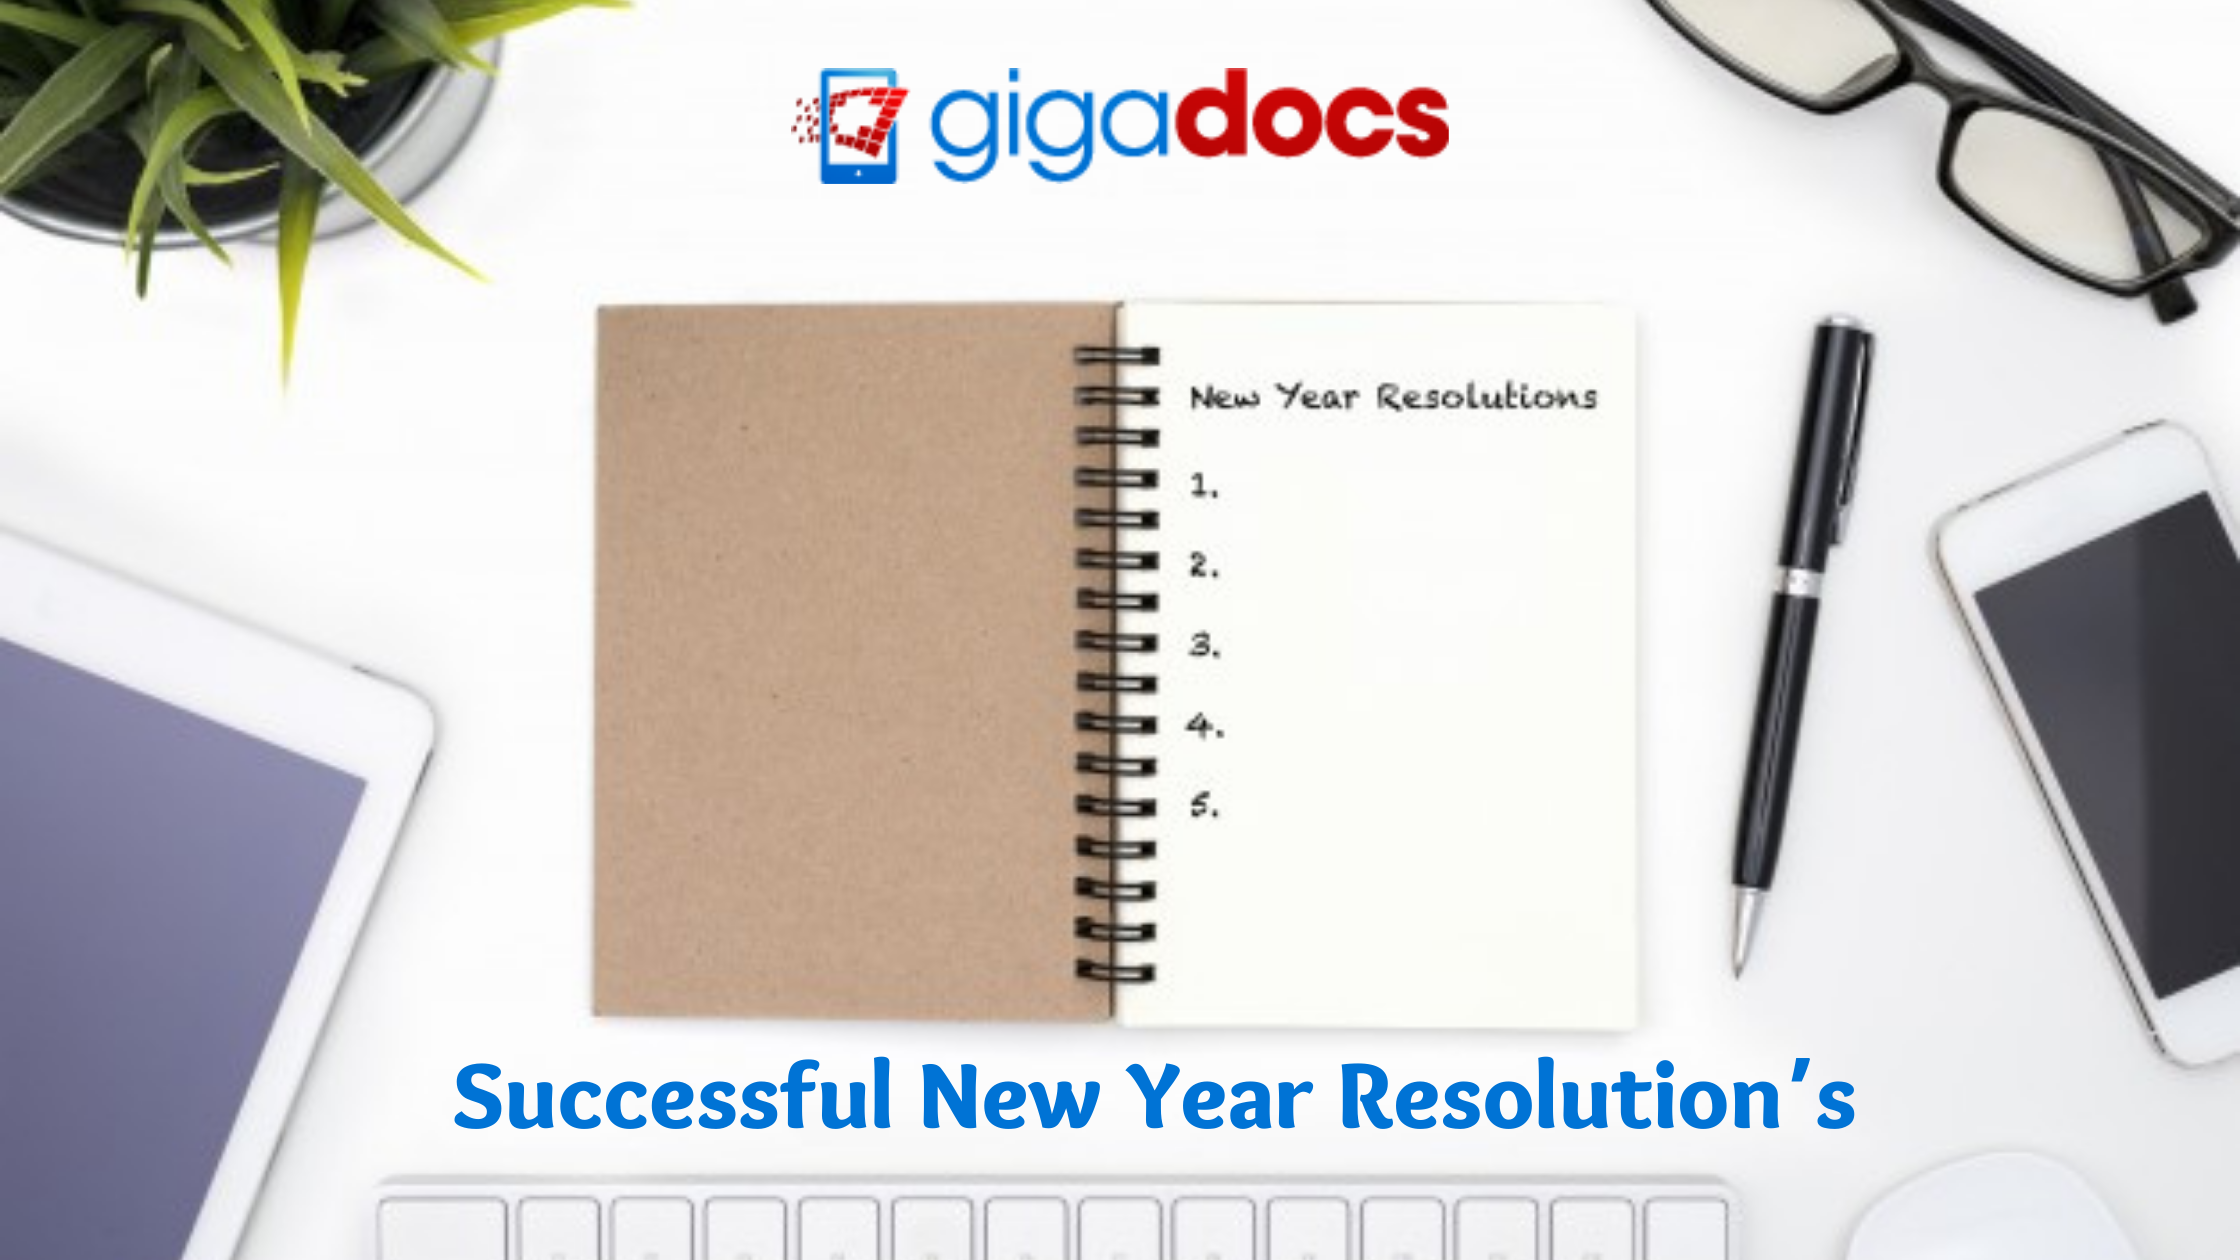 How to Make Successful New Year Resolutions for 2021?